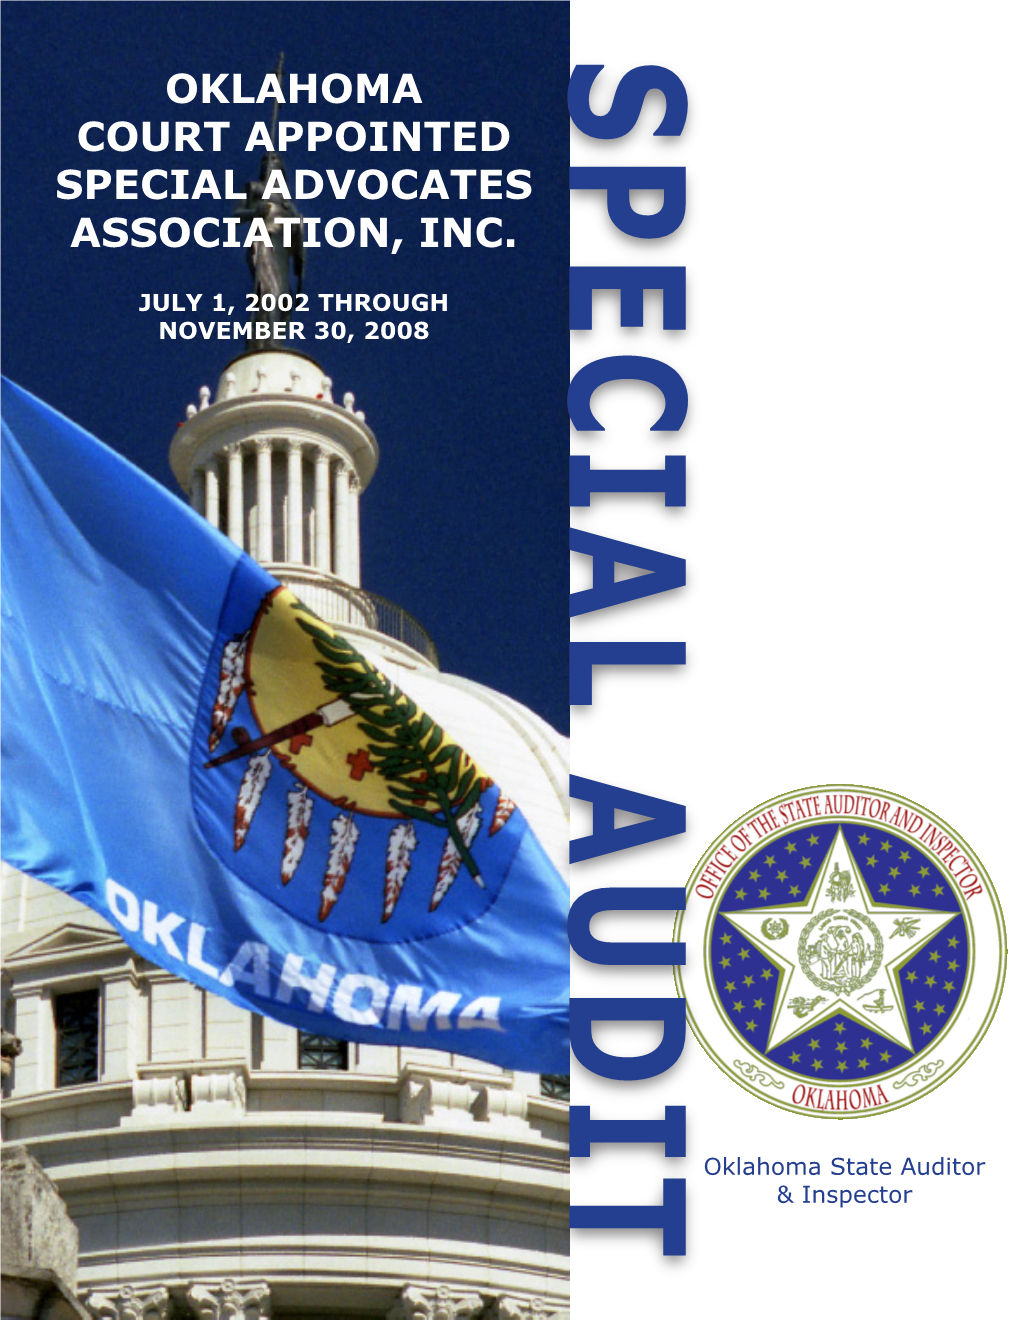 Oklahoma Court Appointed Special Advocates Association, Inc